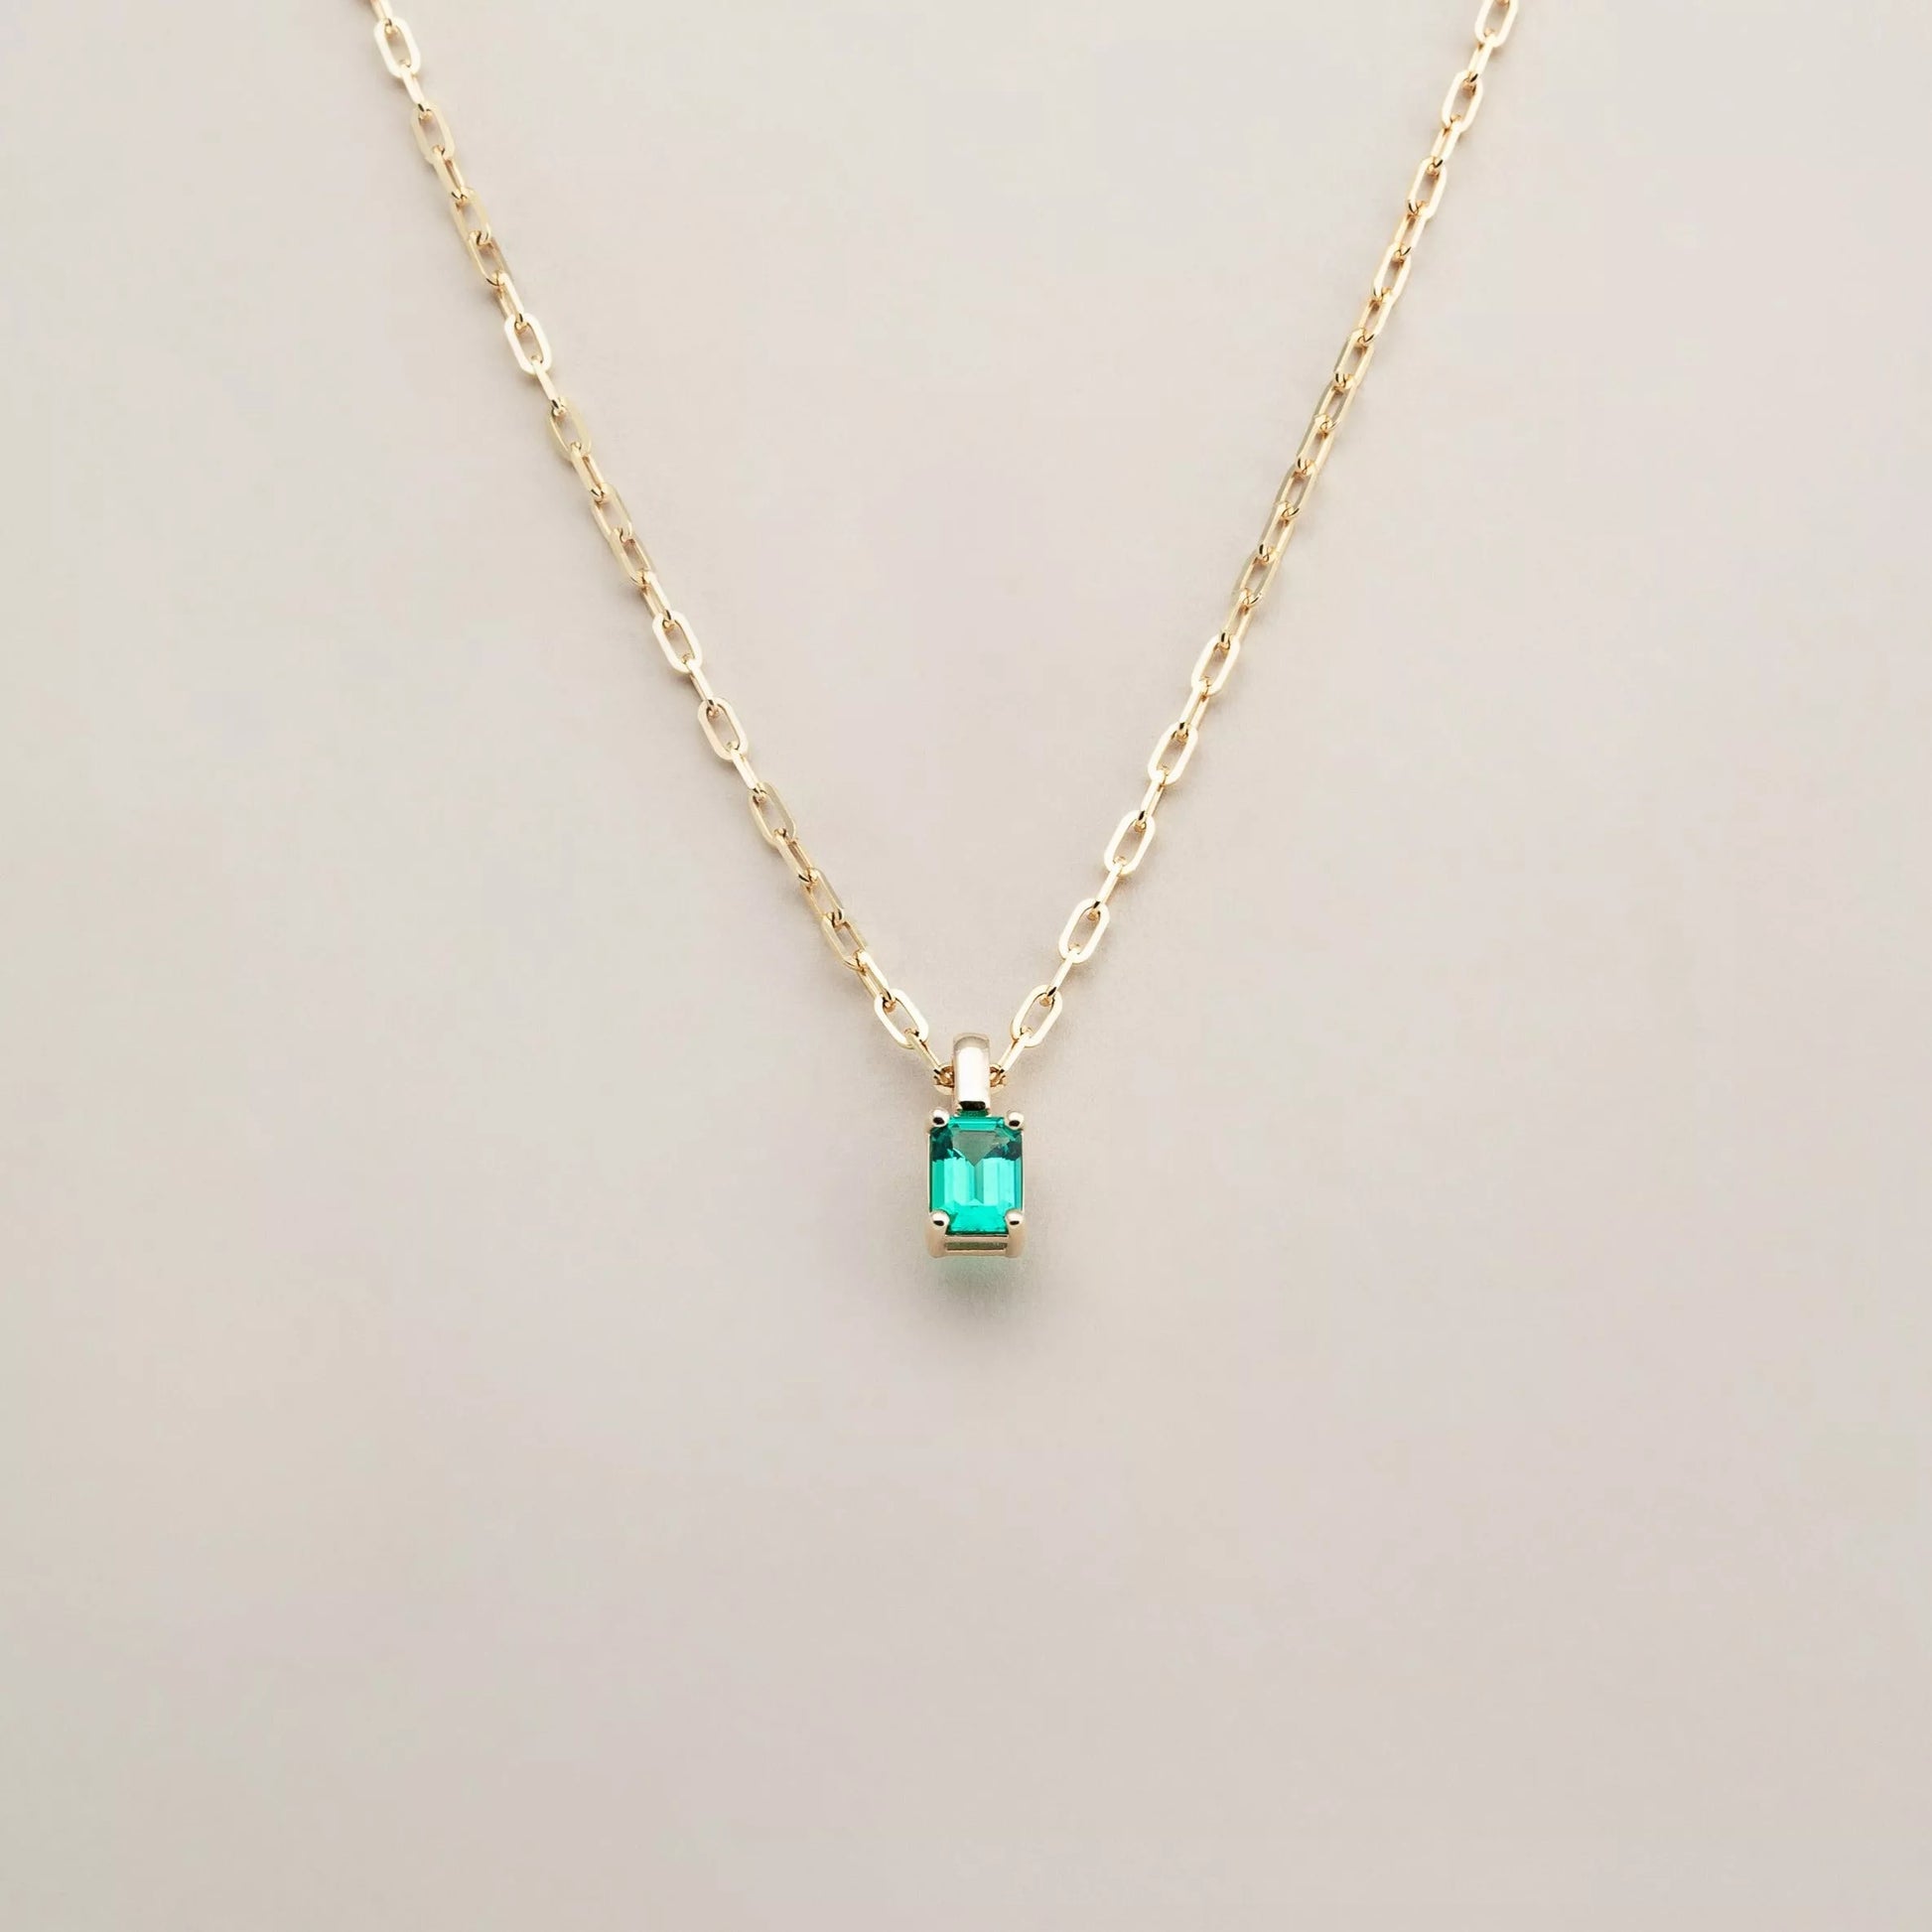 The Emerald Charm Necklace